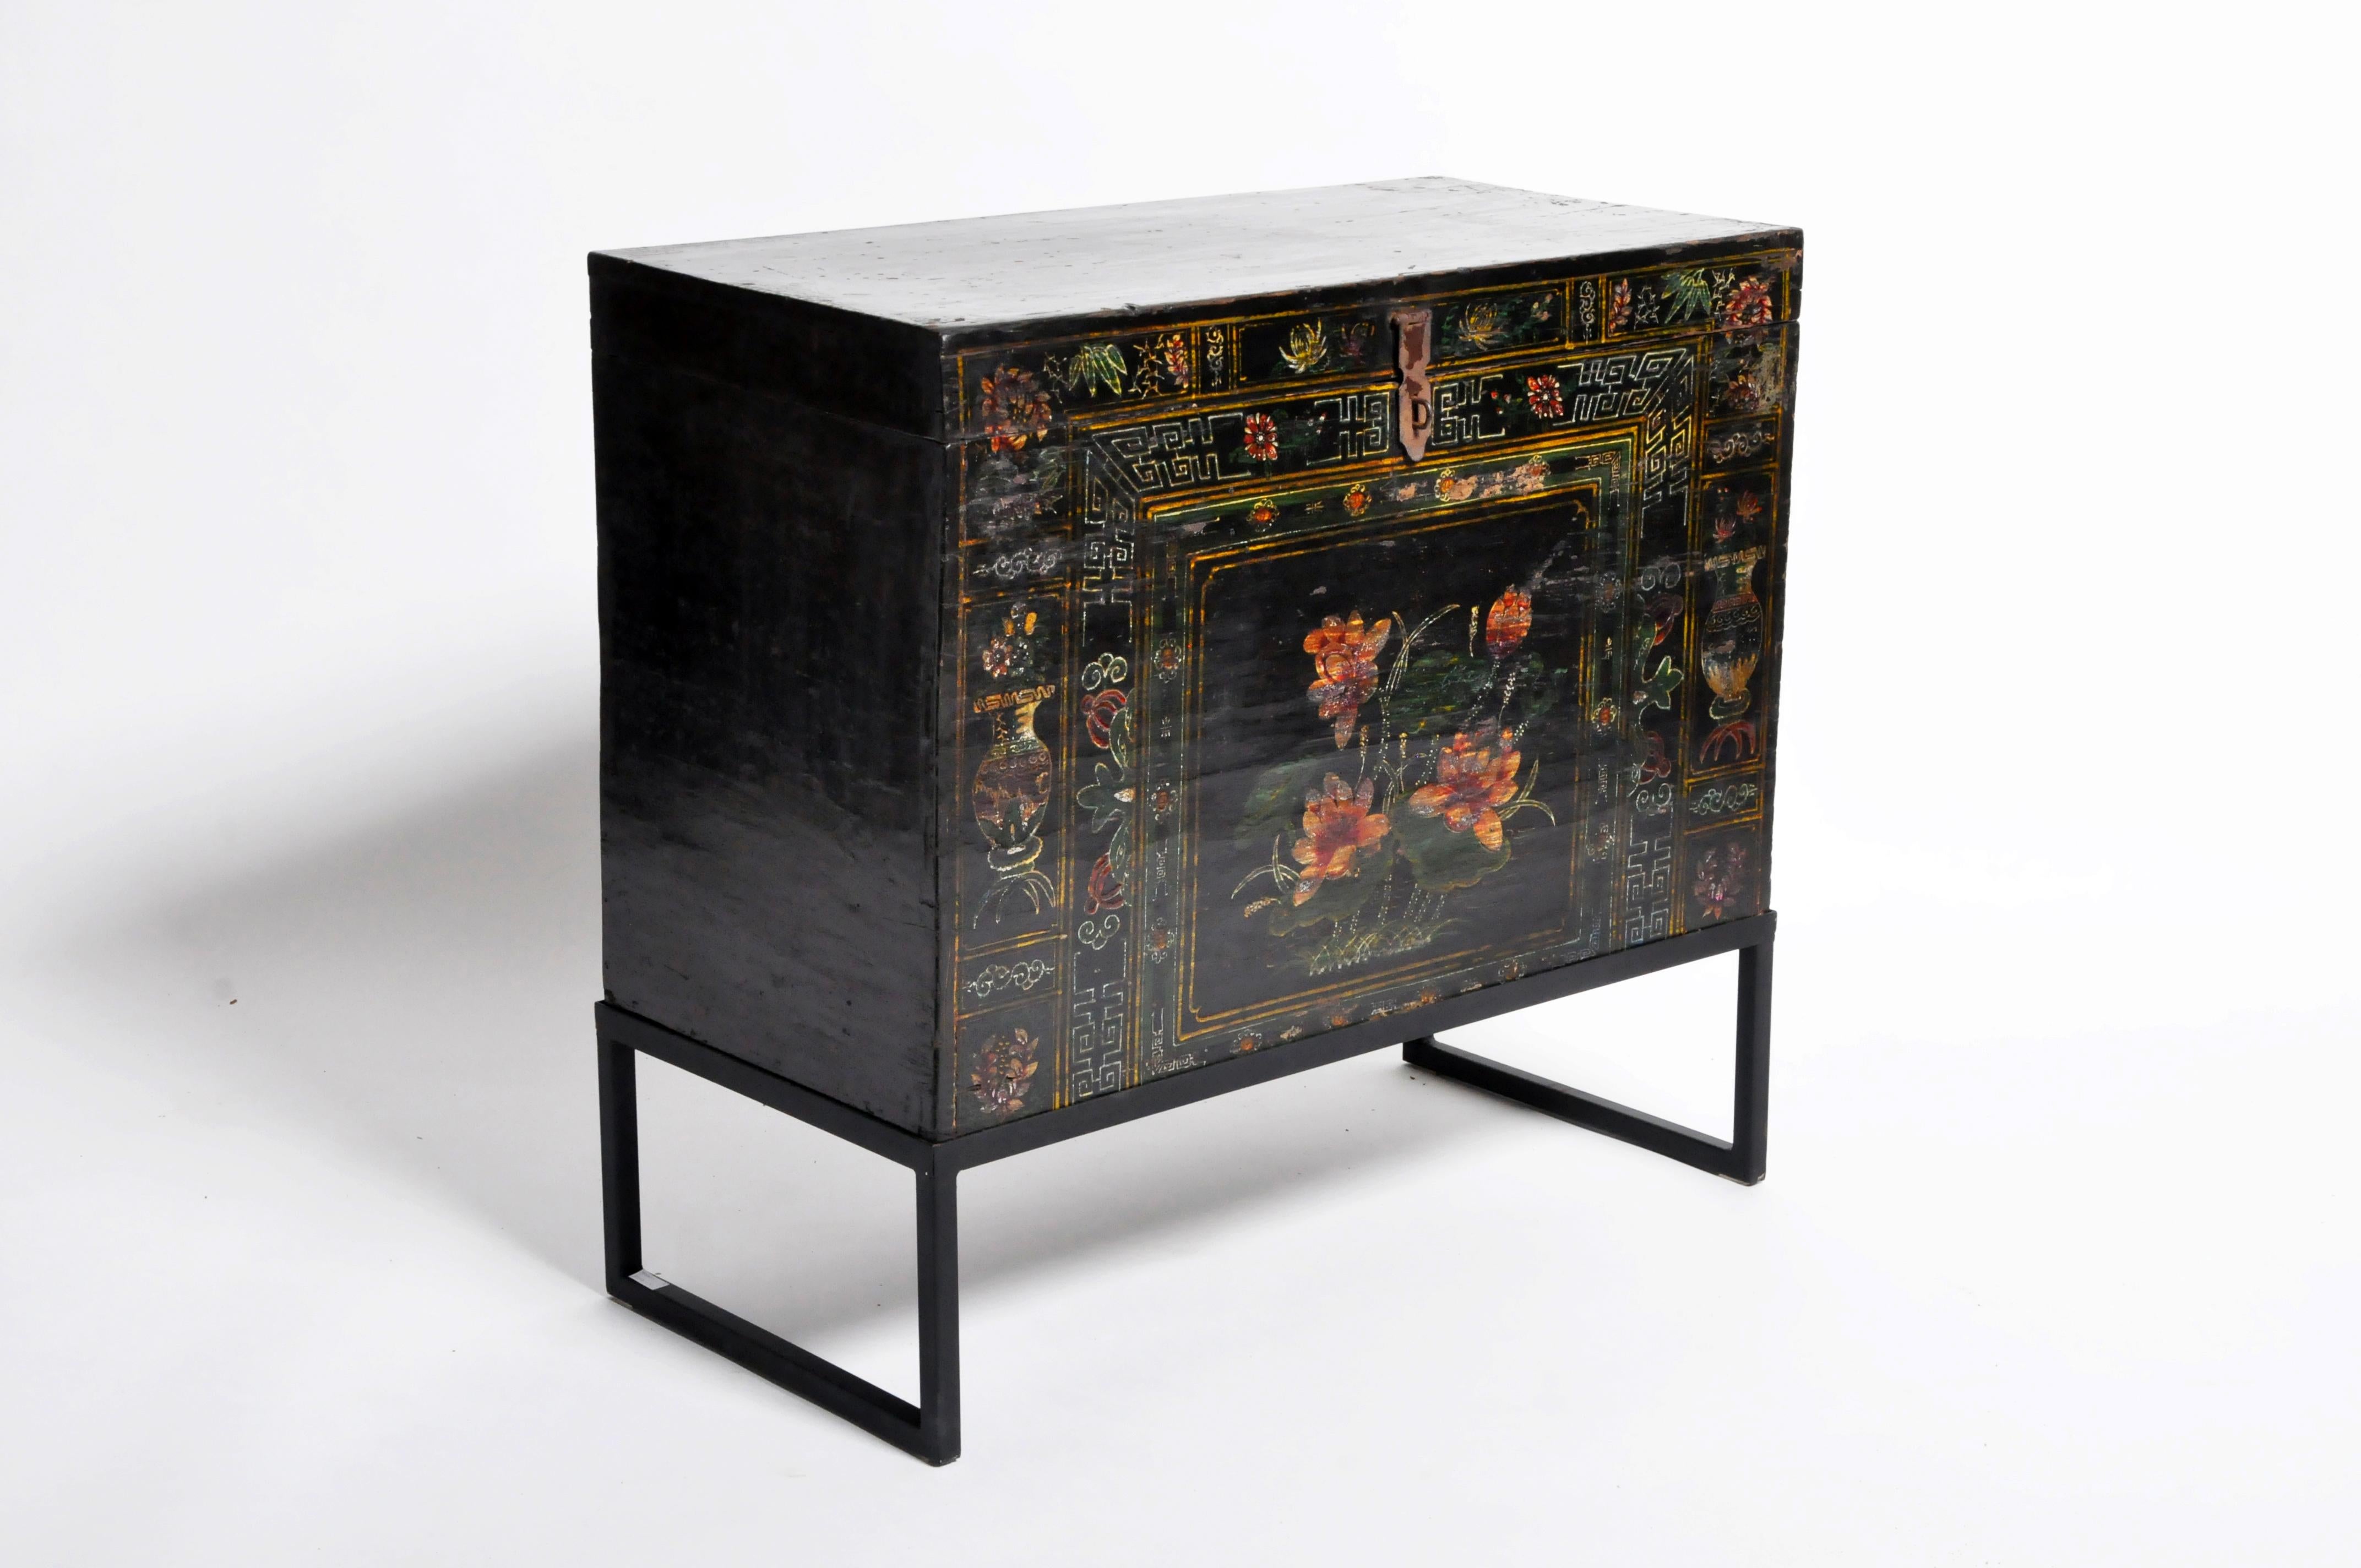 Late Qing Dynasty Storage Chest with Painting and Metal Base 14